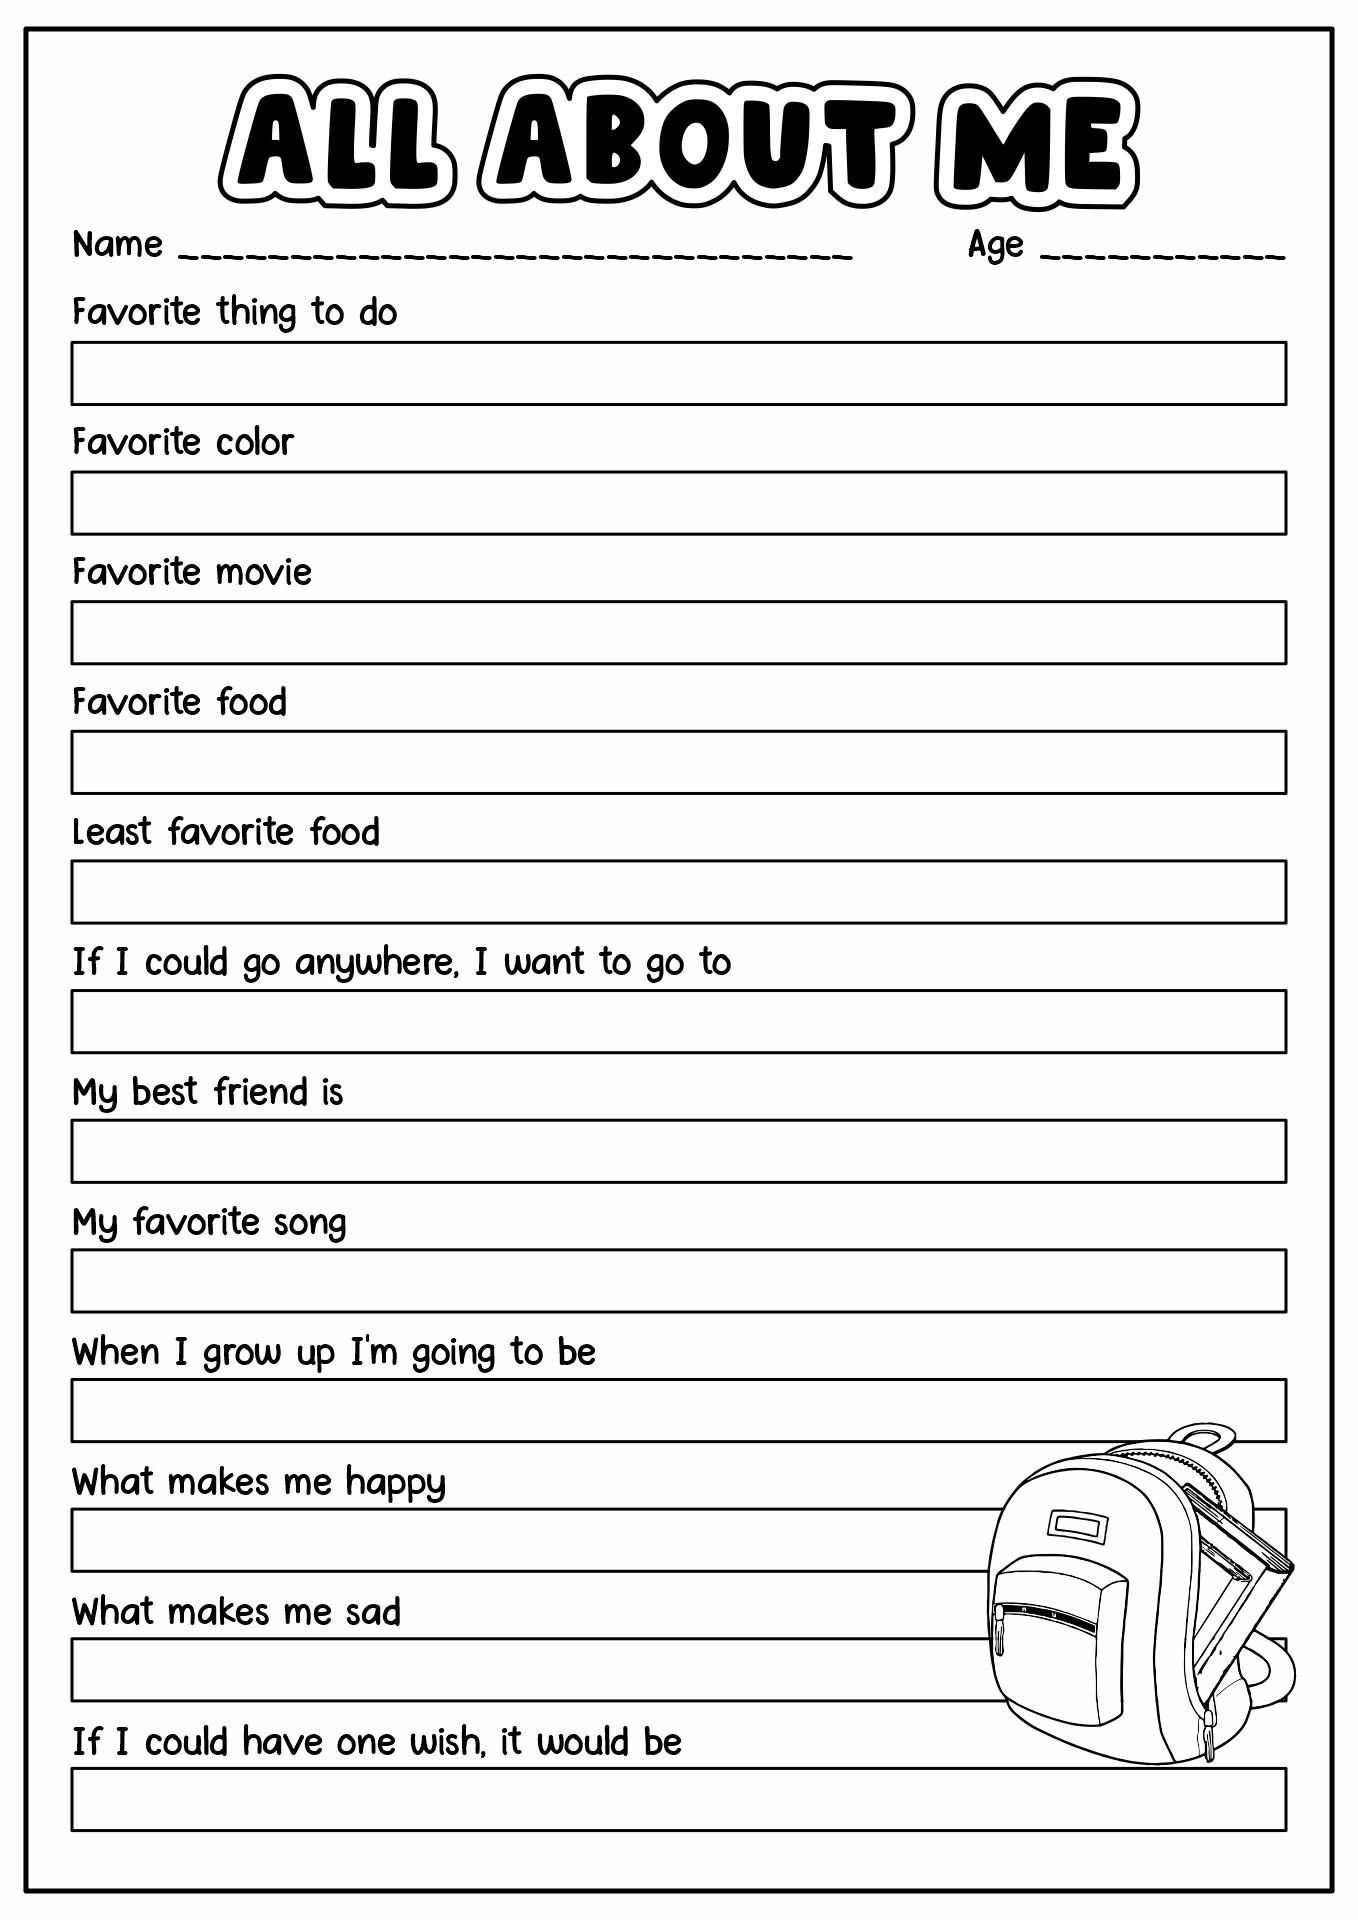 printable-all-about-me-questions